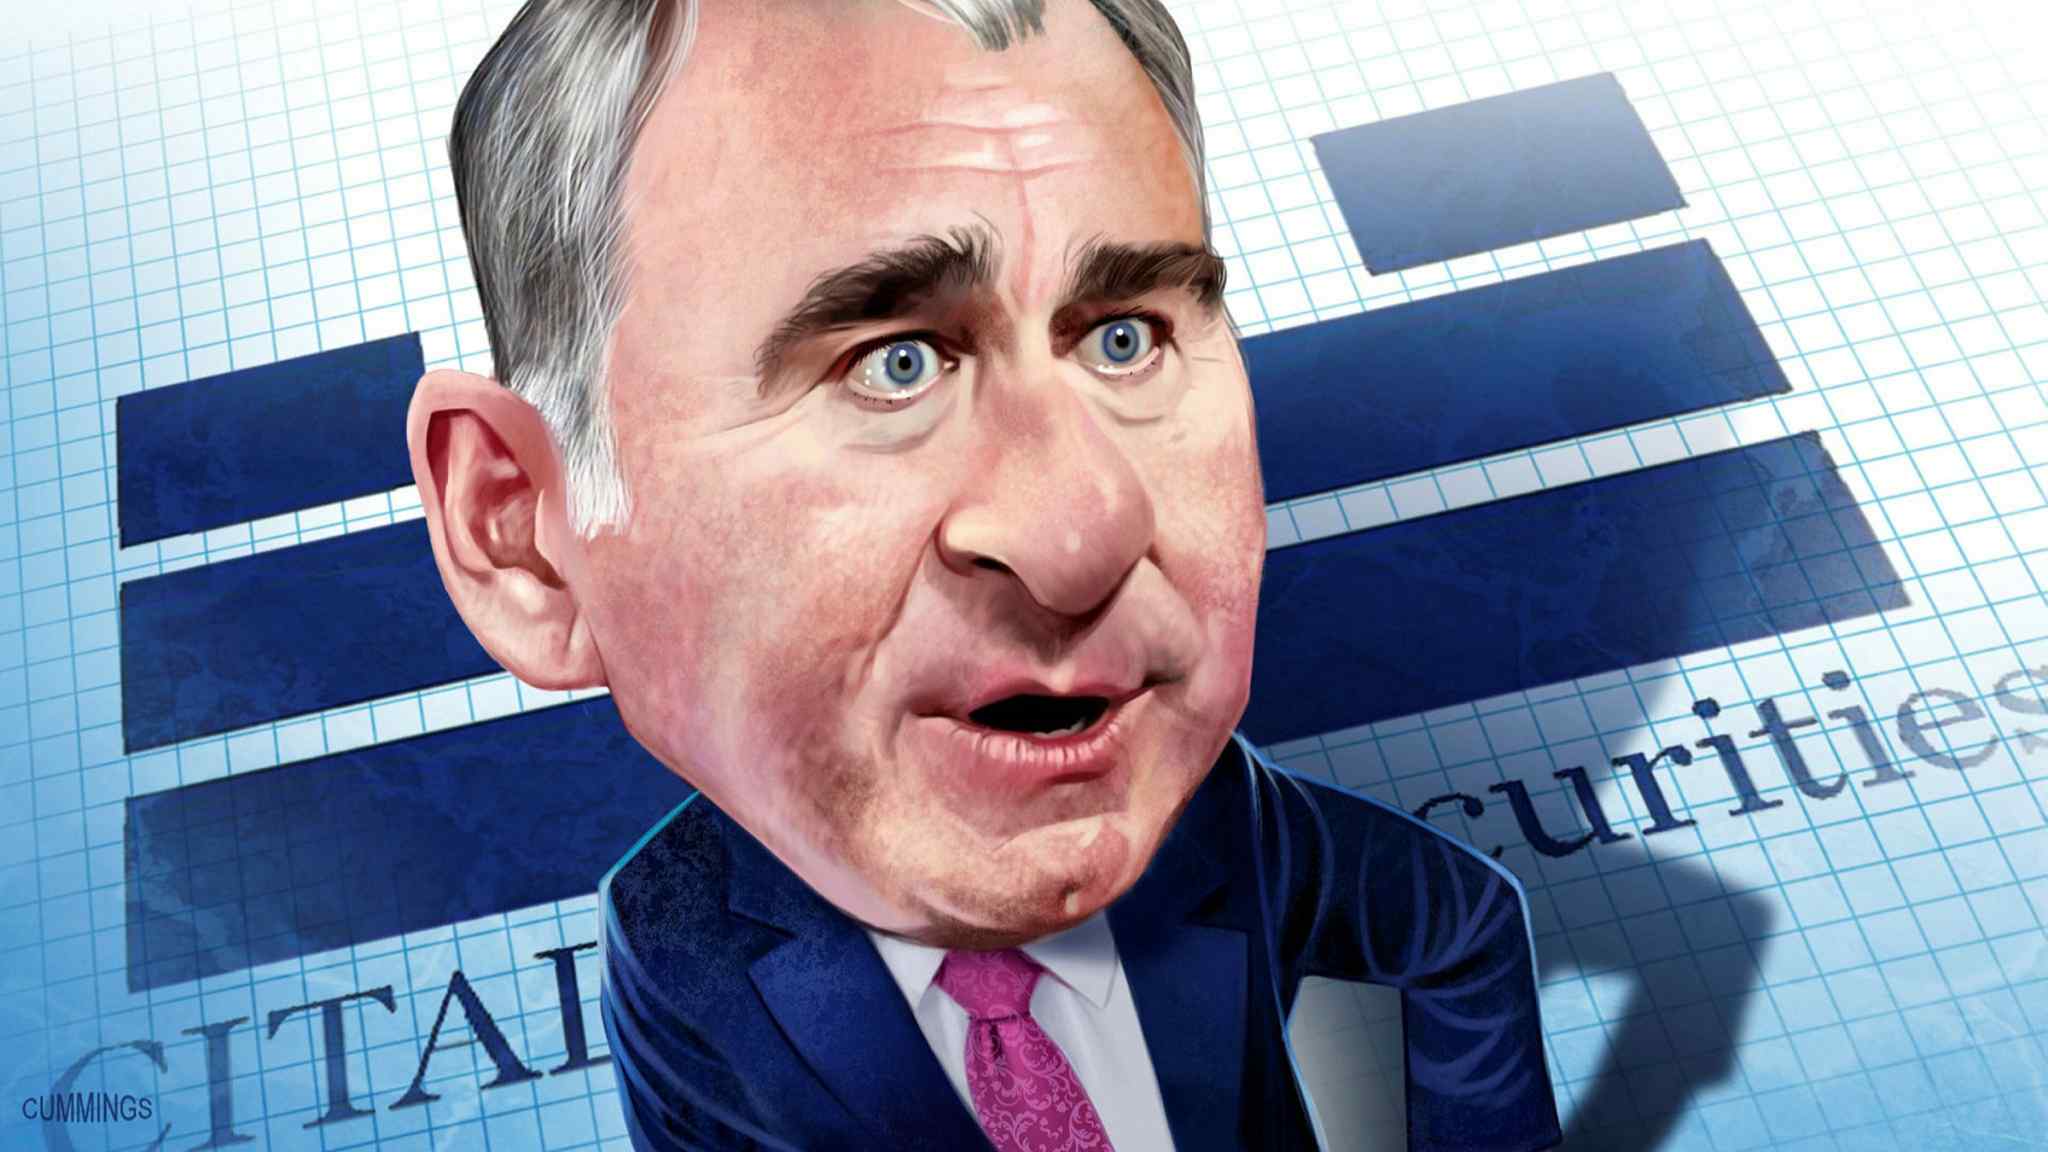 Ken Griffin, financial prodigy turned industry giant